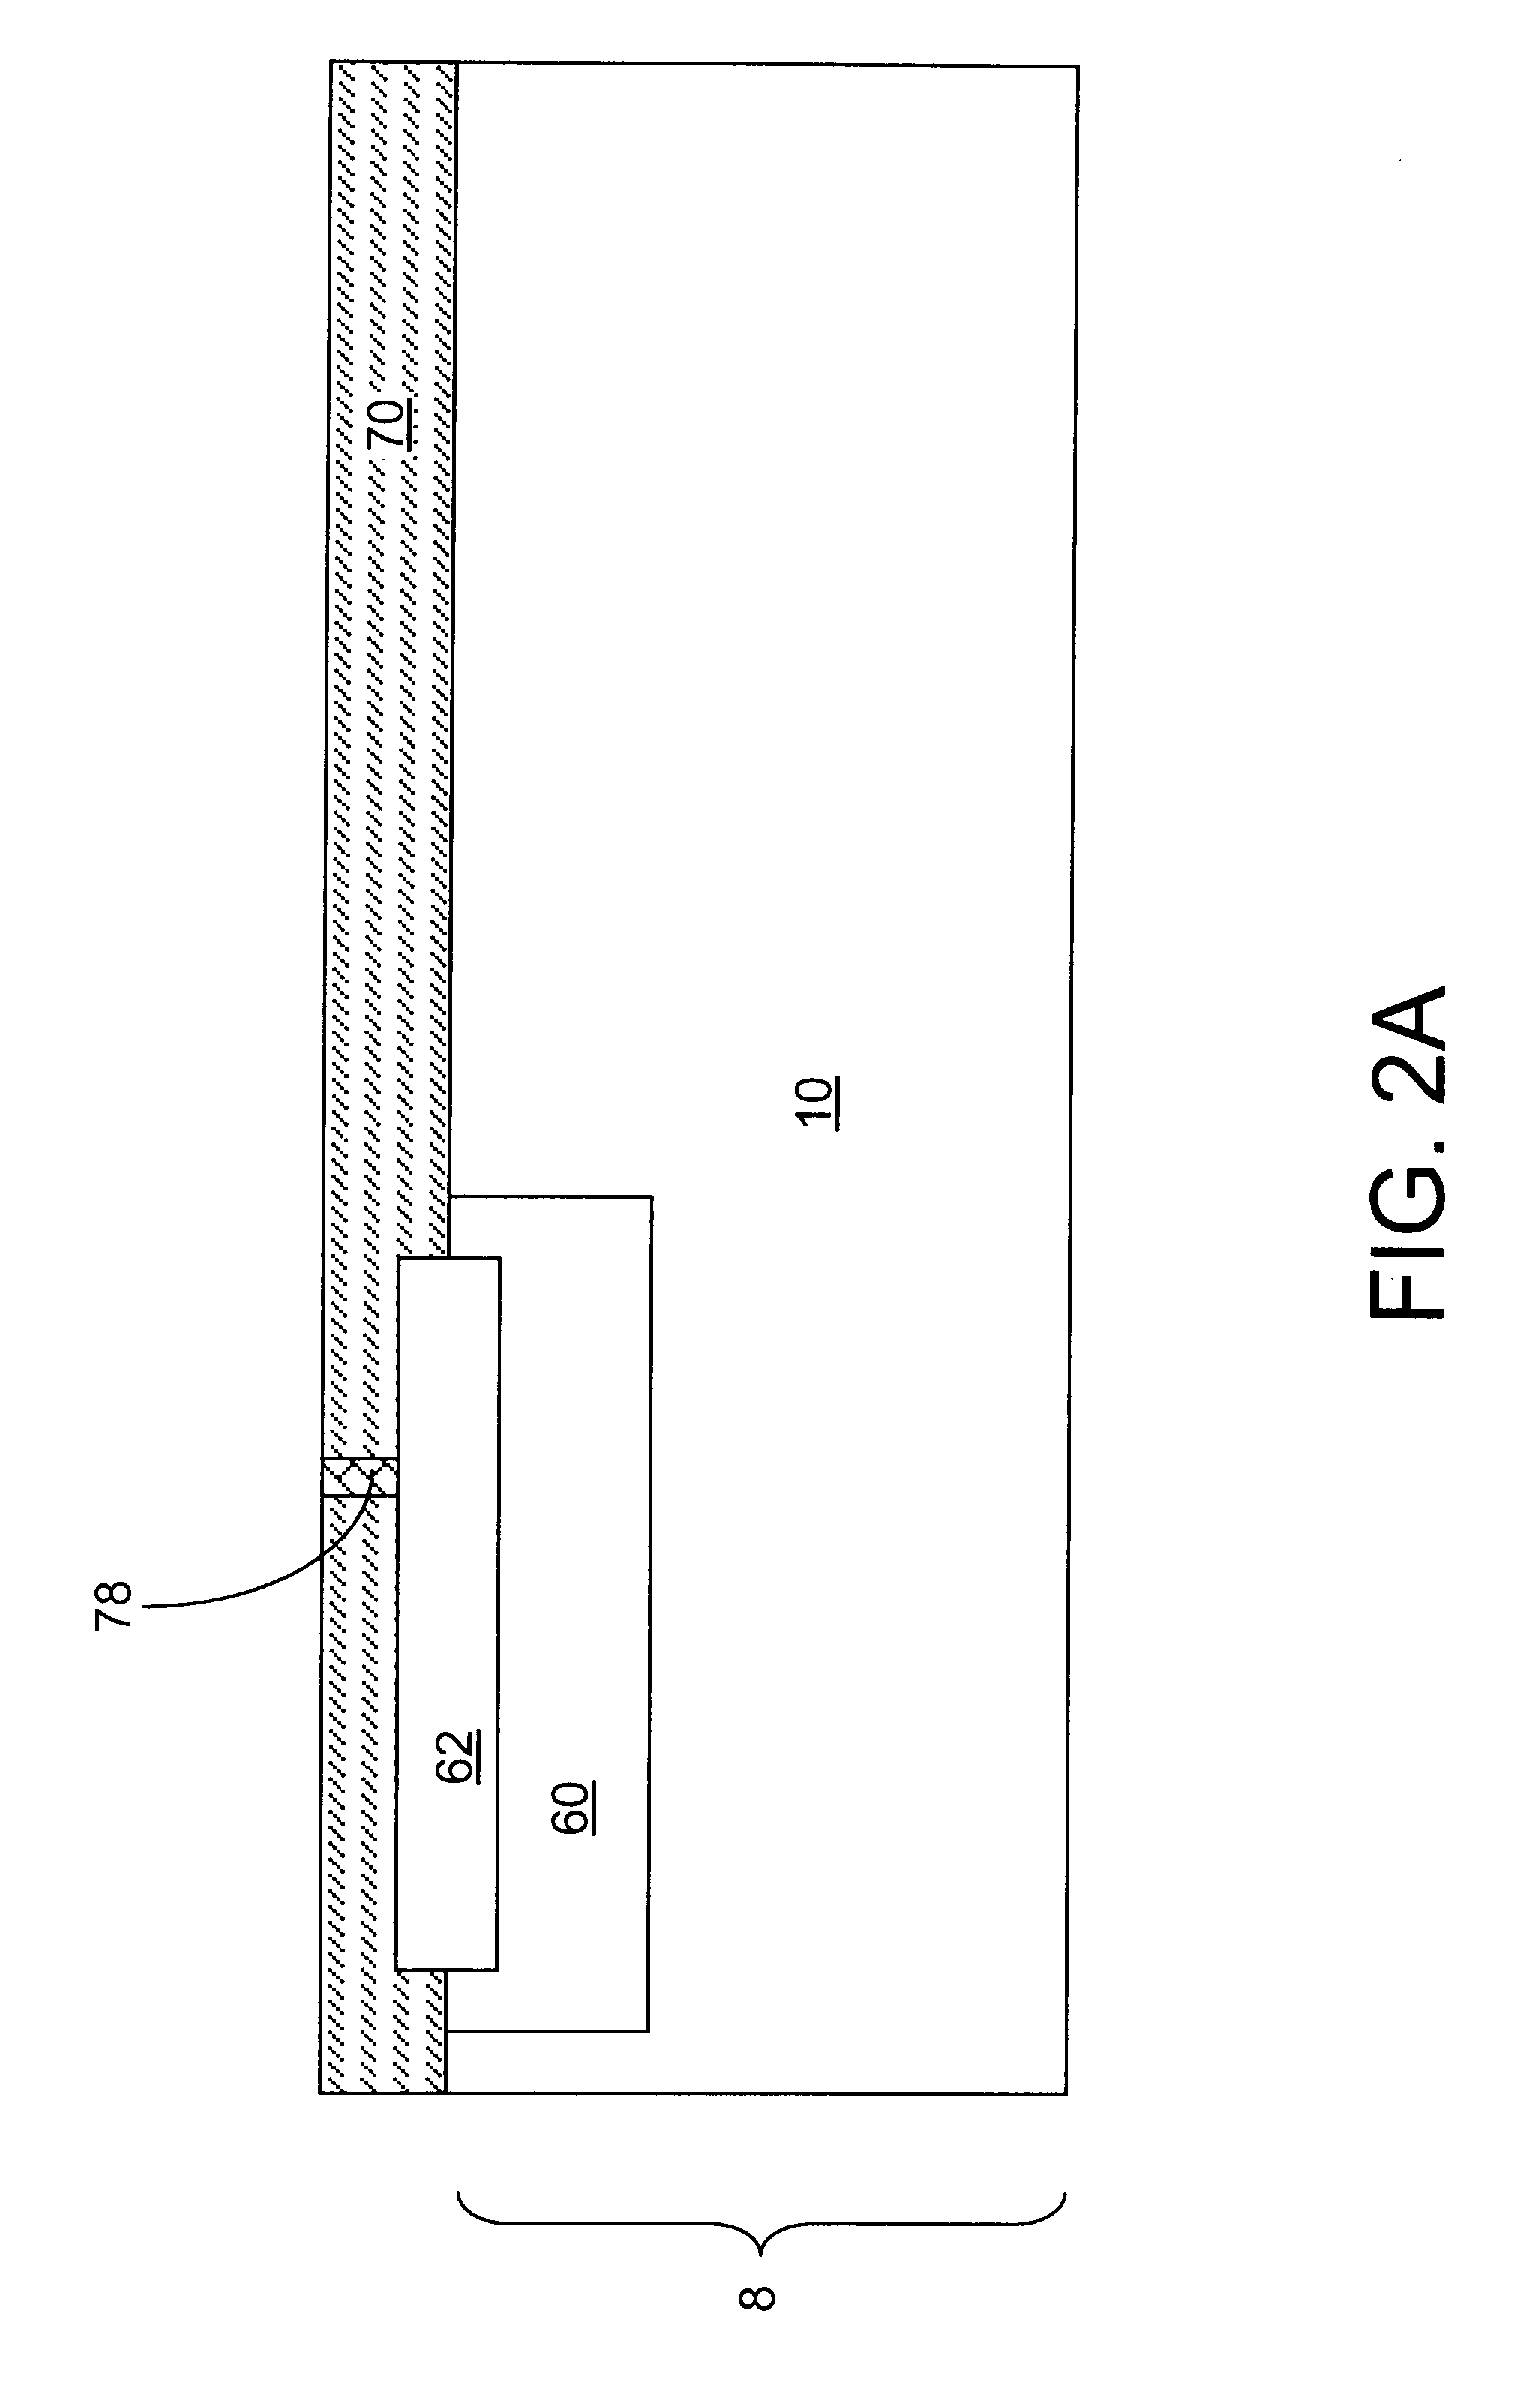 Integrated millimeter wave antenna and transceiver on a substrate